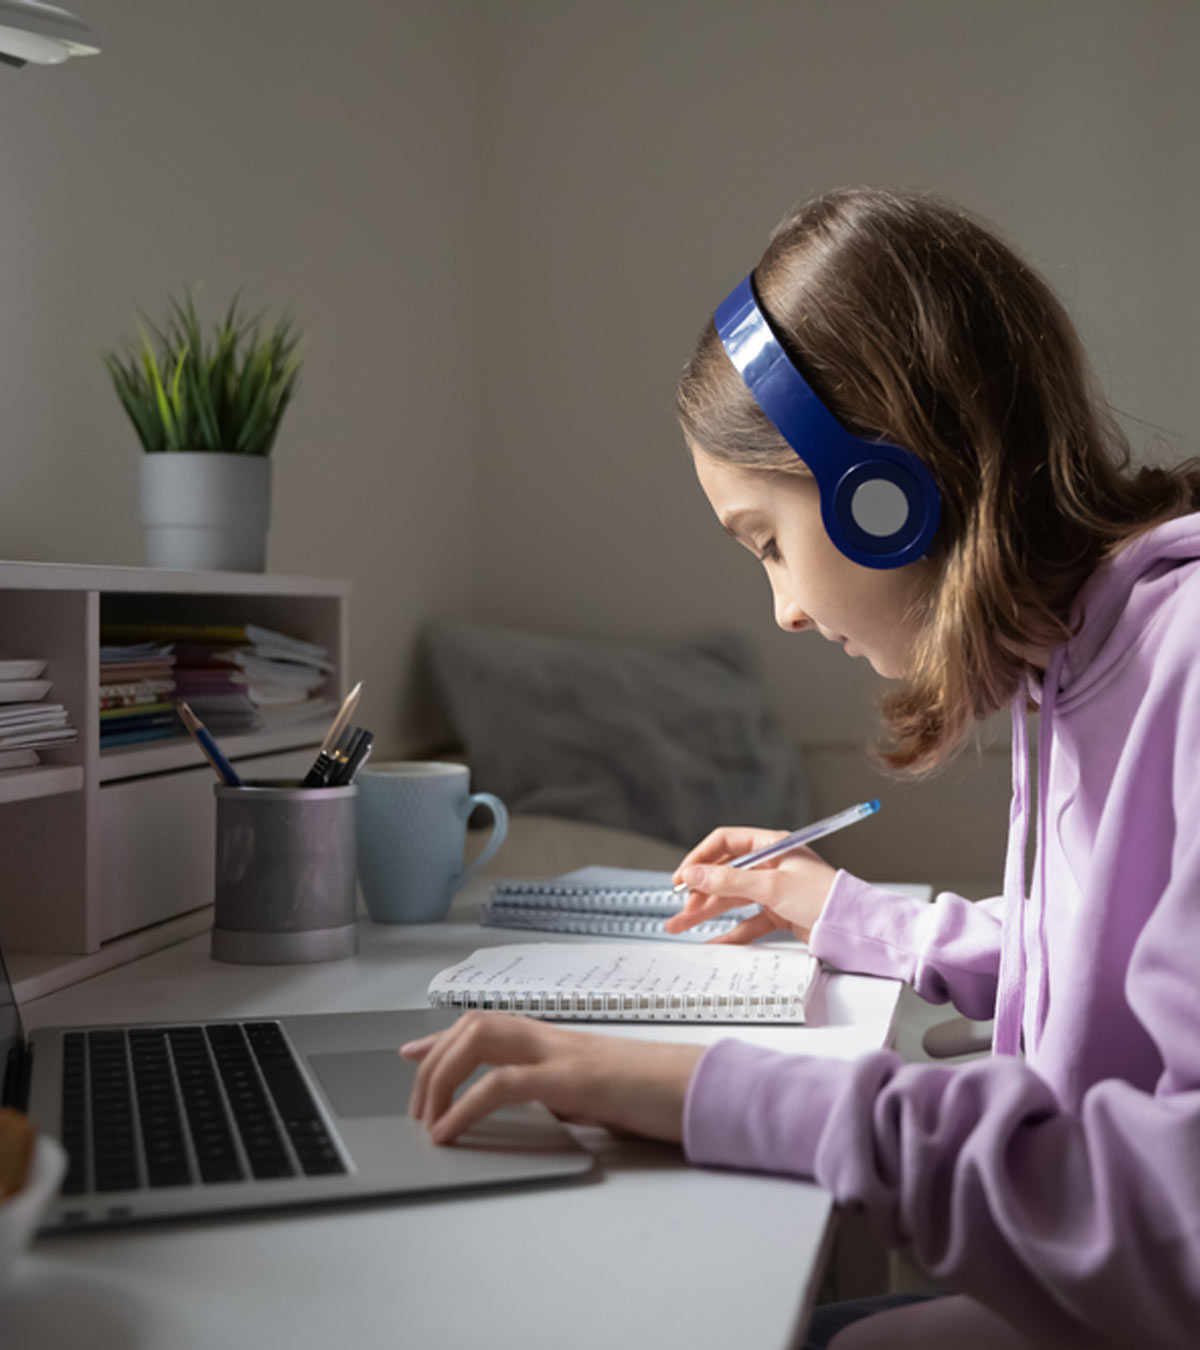 10 Tips For Parents To Improve And Troubleshoot Remote Learning